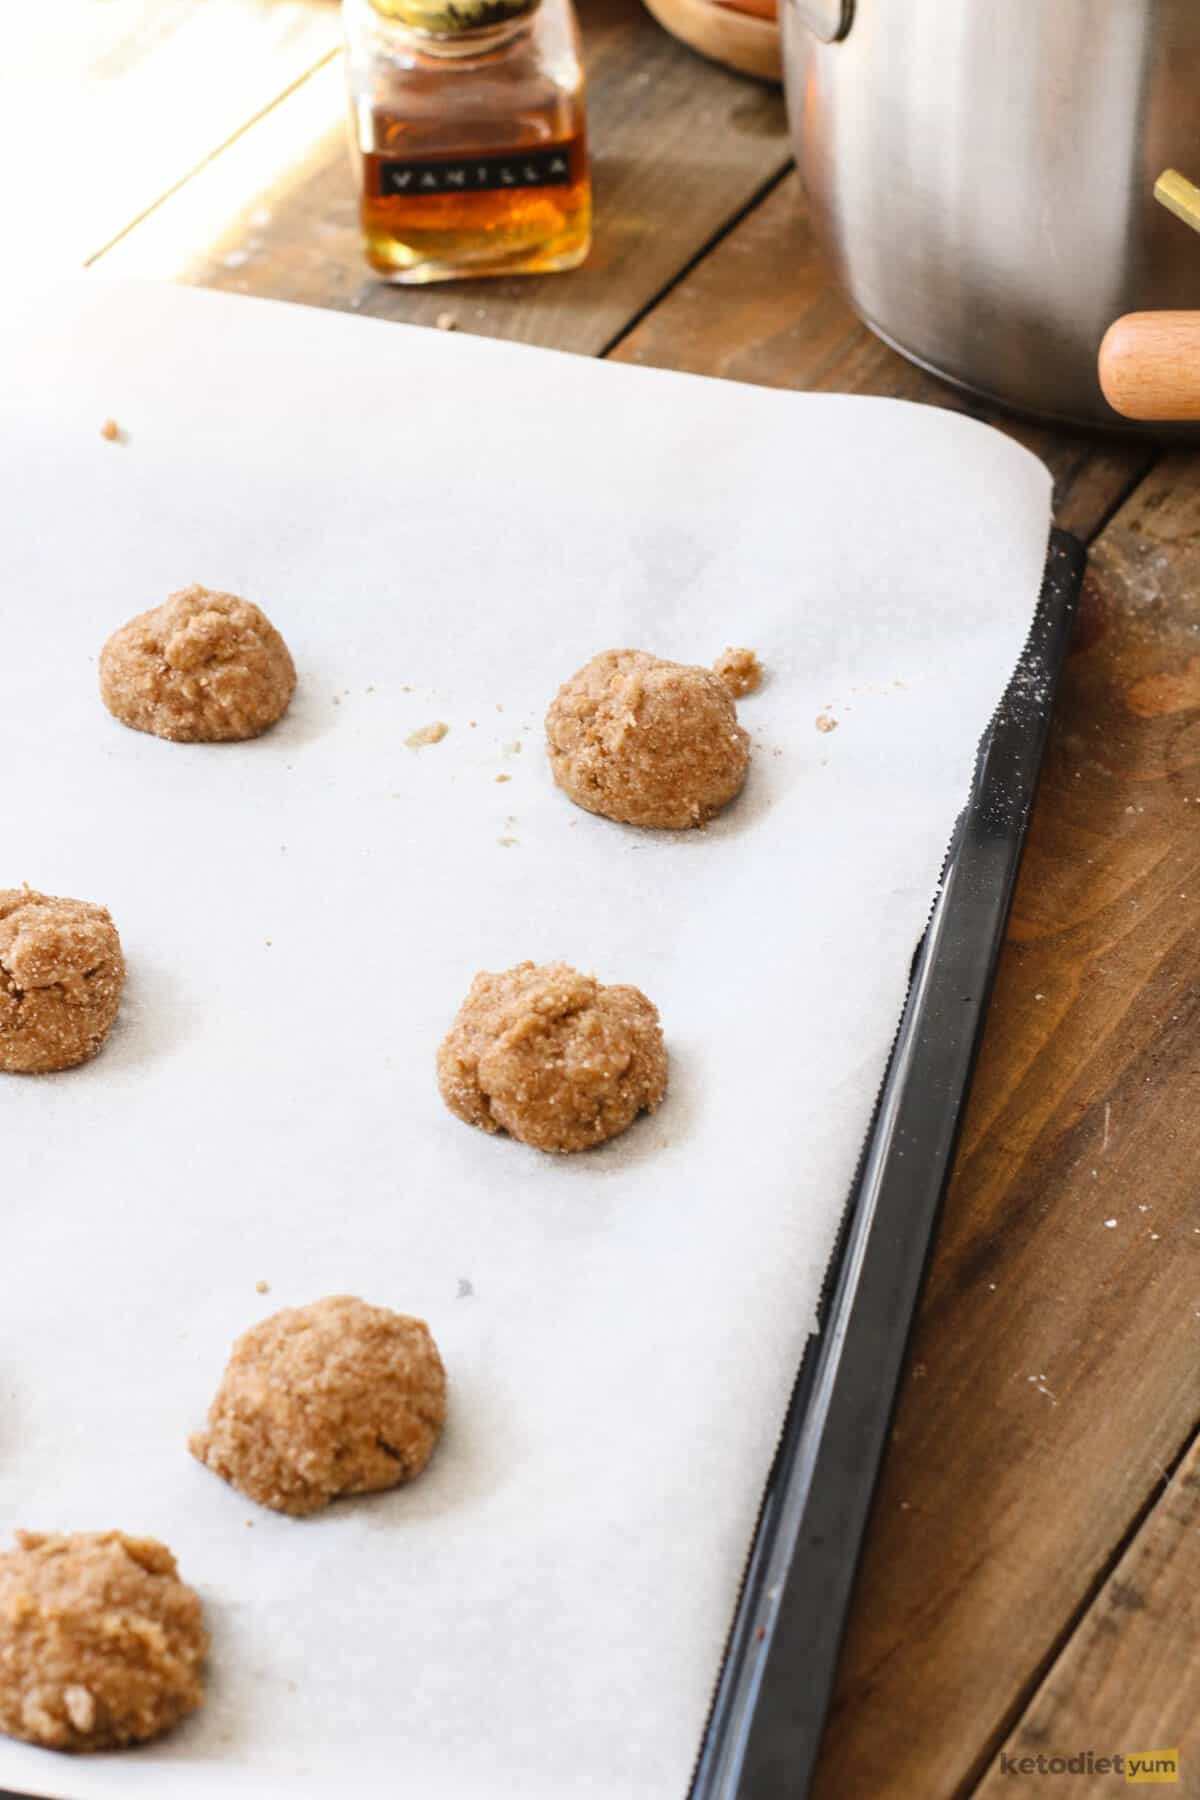 Donut balls on a lined baking pan